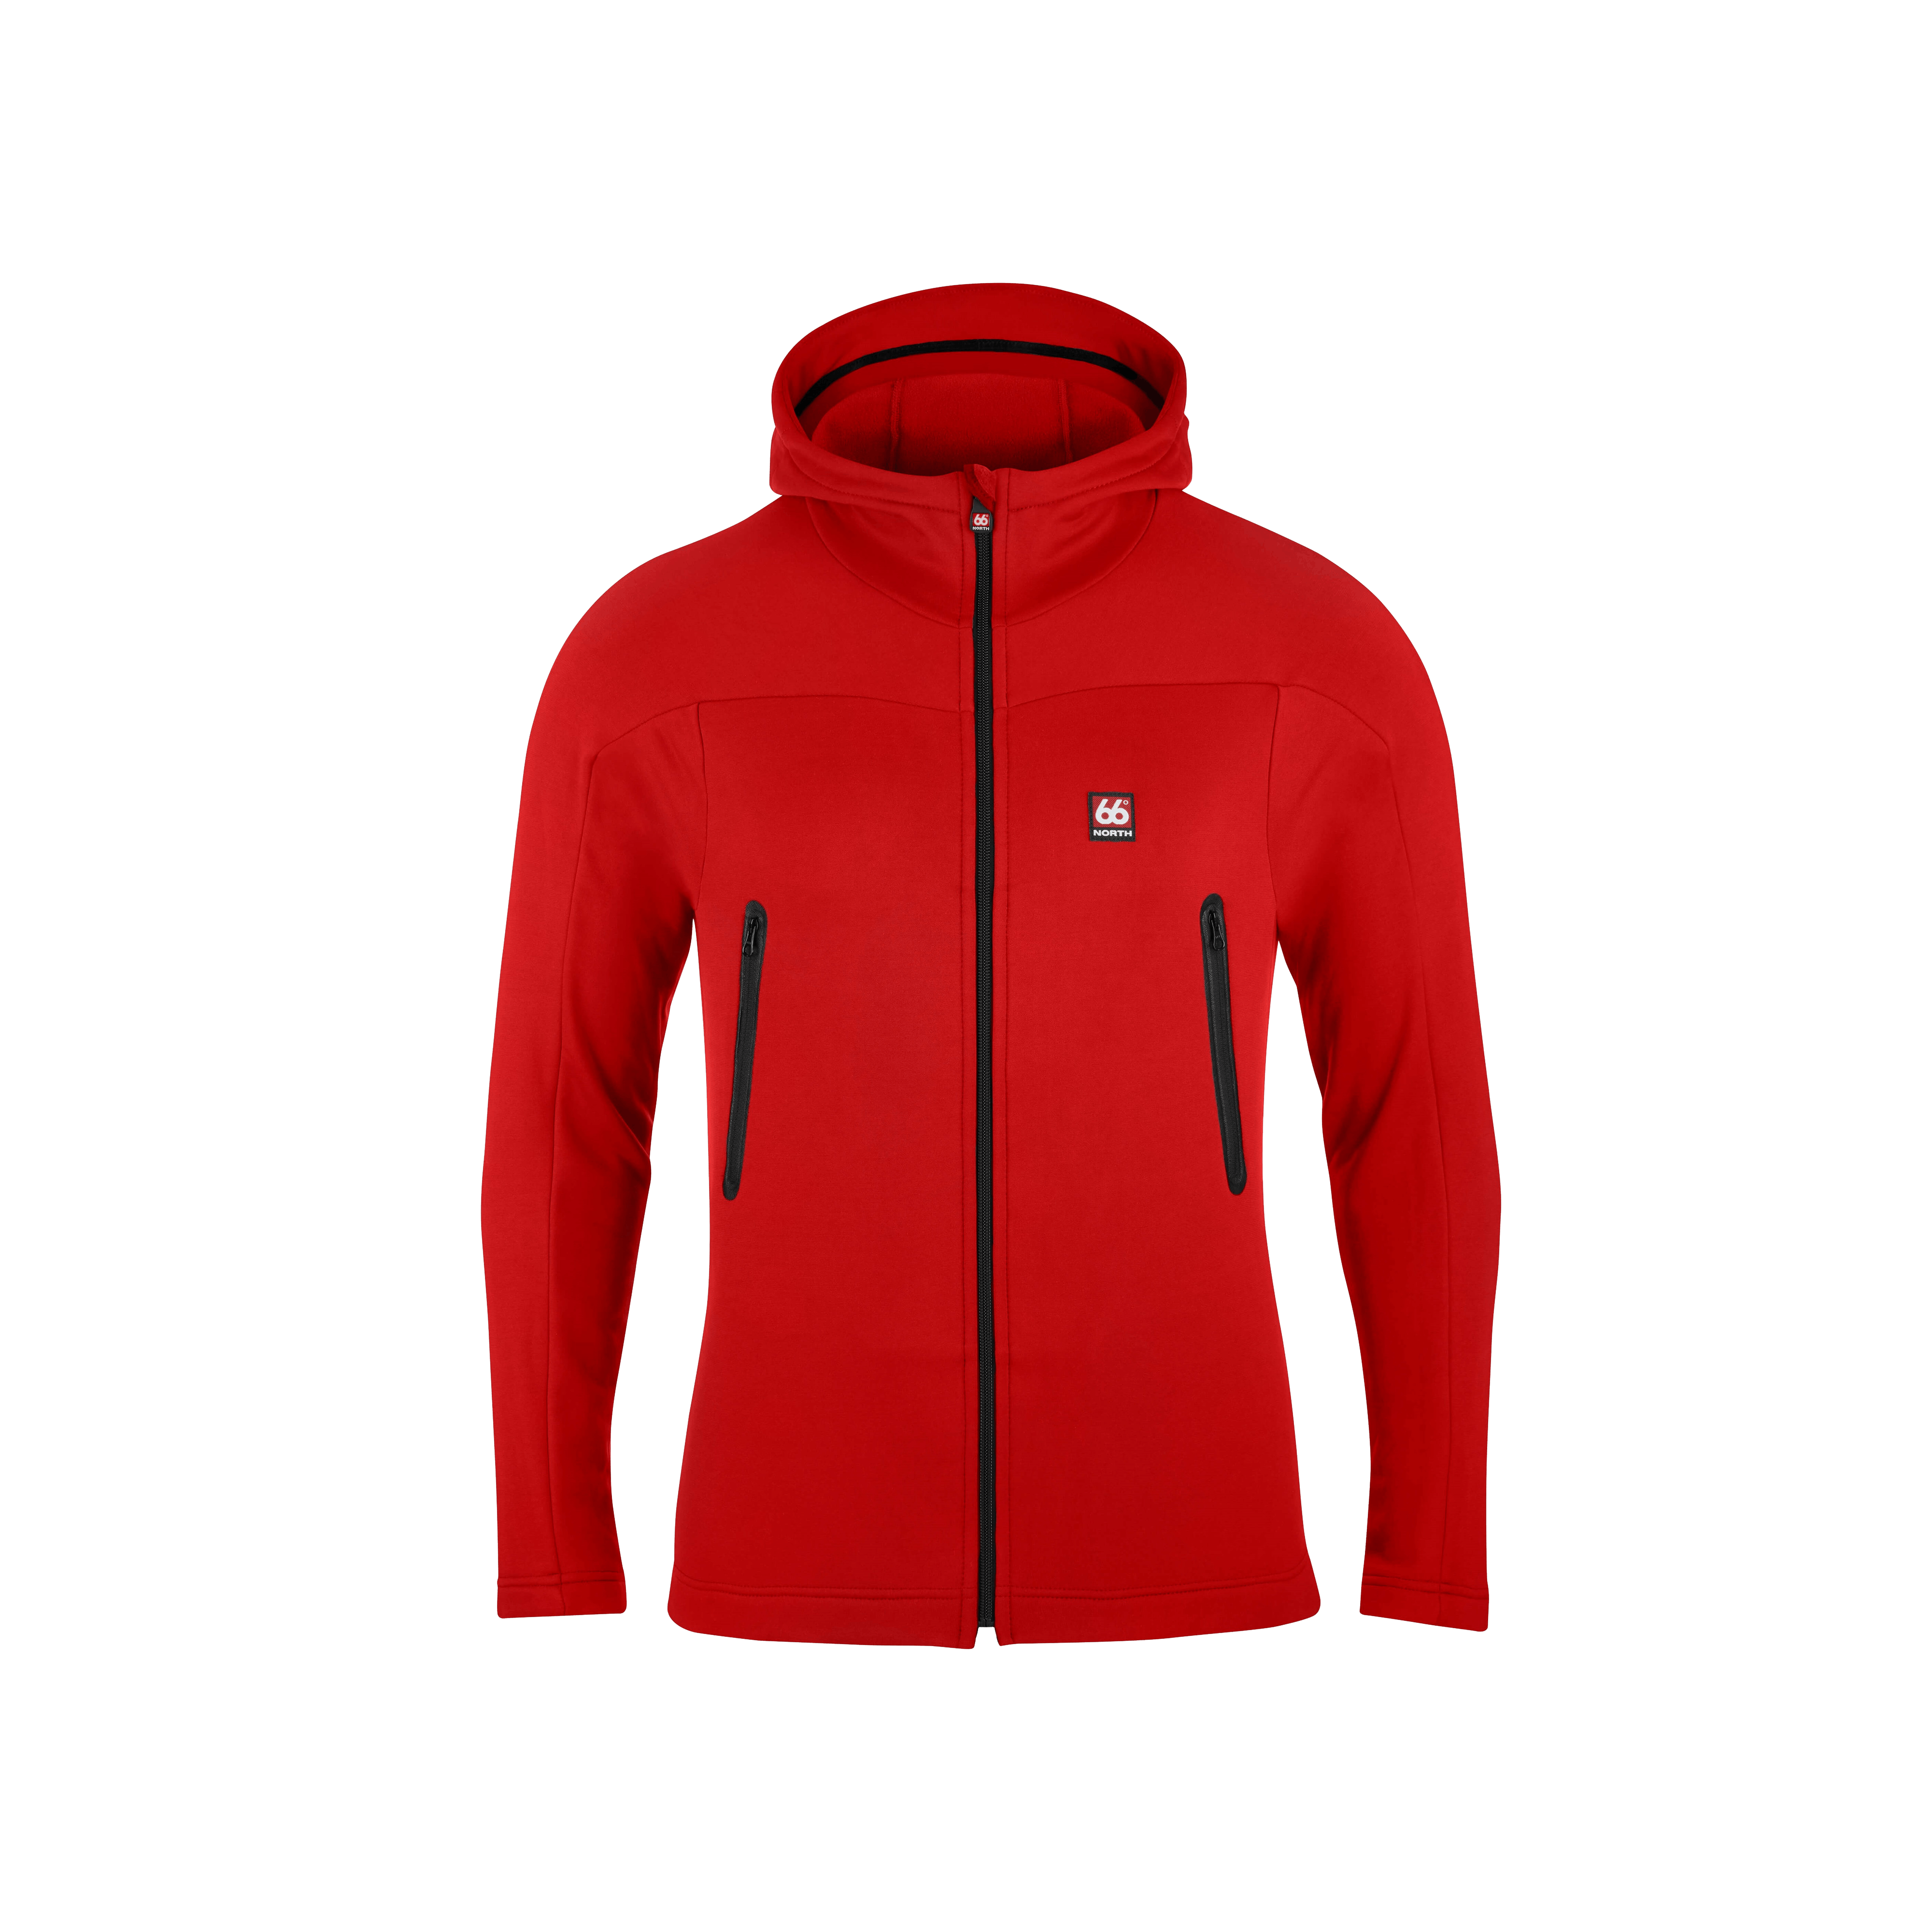 66 North Mens Snfell TopsandVests - Red - M